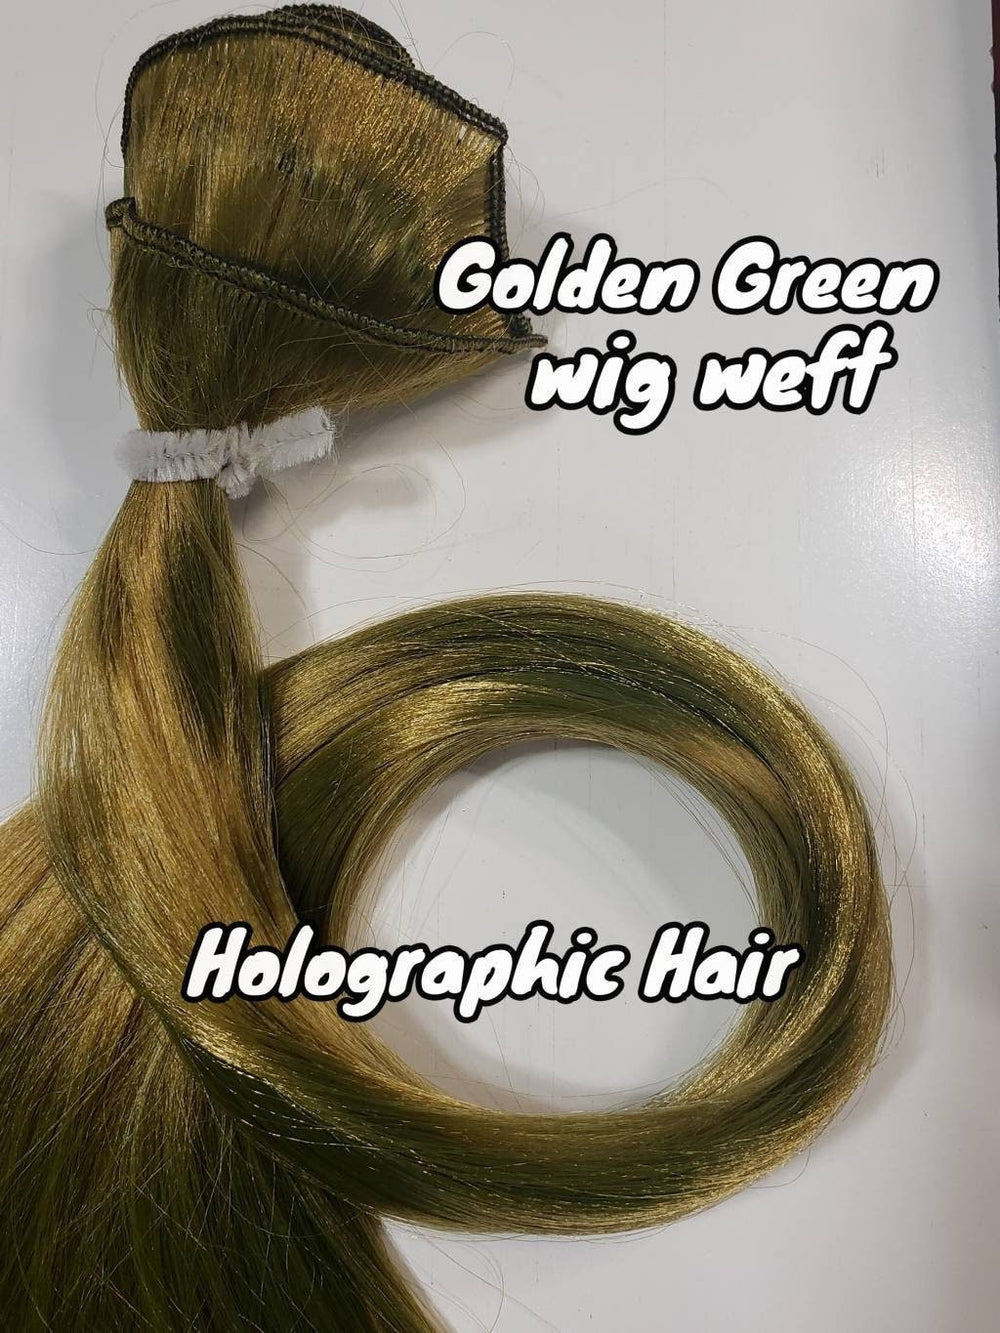 DG-HQ™ Wig Weft Nylon Golden Green NC114B Holographic Nylon Weft 30"Wx20"L Doll Hair for Making Fashion Doll Wigs Standard Temperature